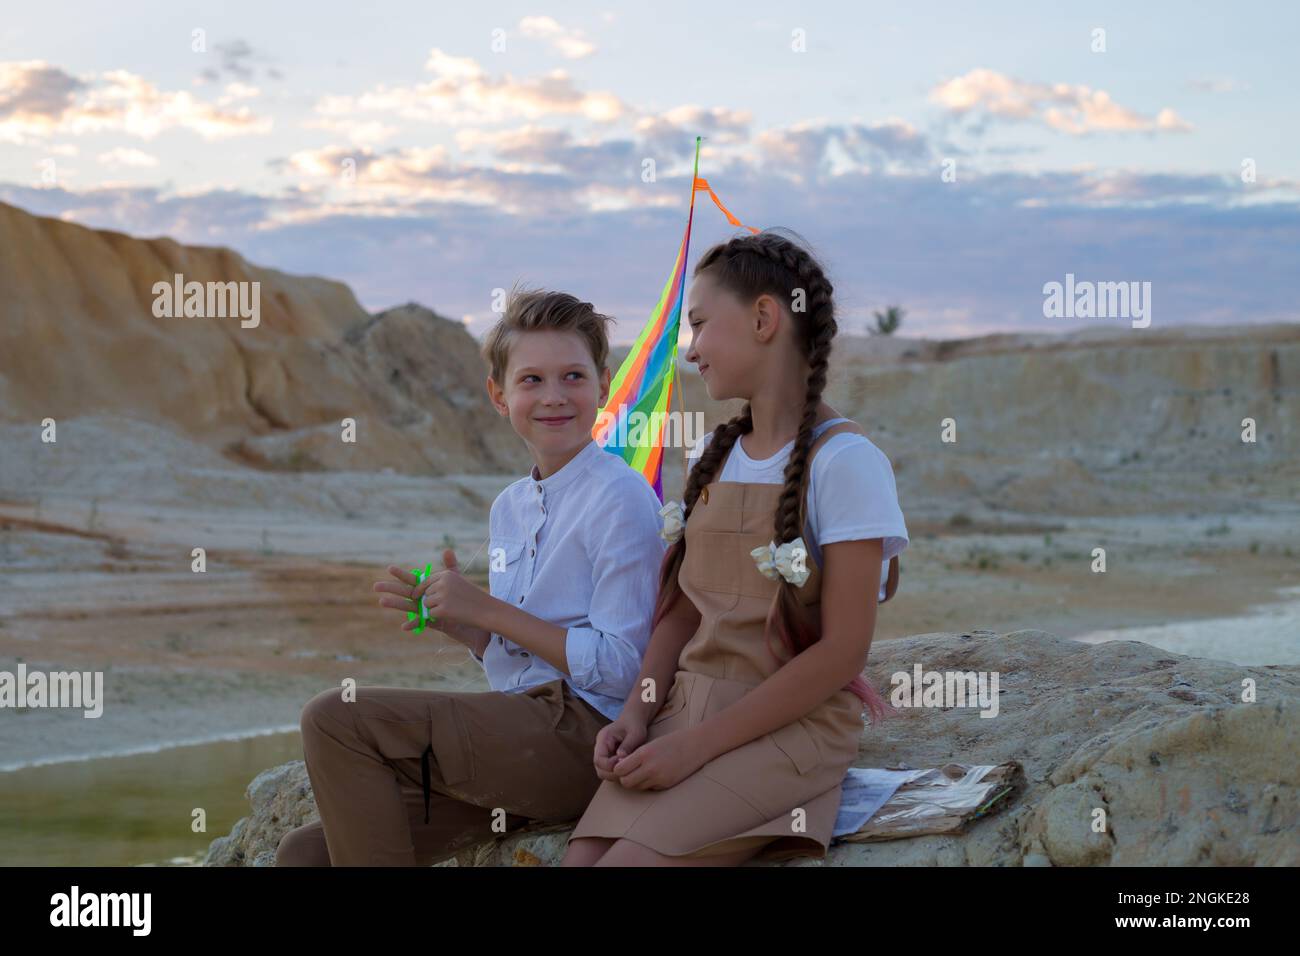 A boy and a girl 8-9 years old with kite are having fun talking on mountain. Stock Photo